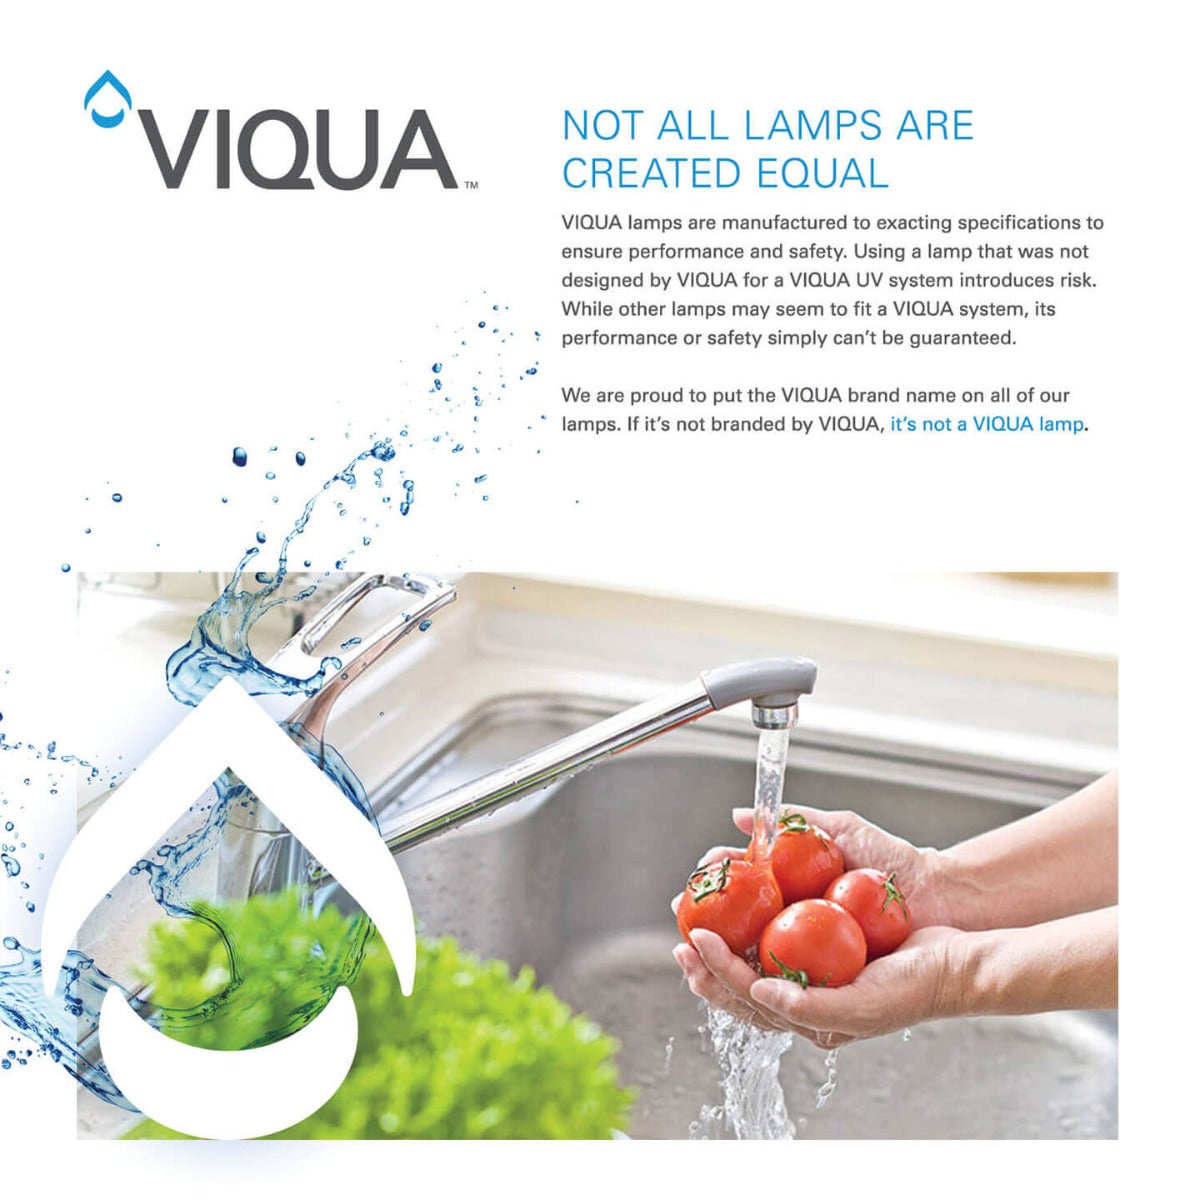 IHS12-D4 Home Plus UltraViolet Water Disinfection System by Viqua